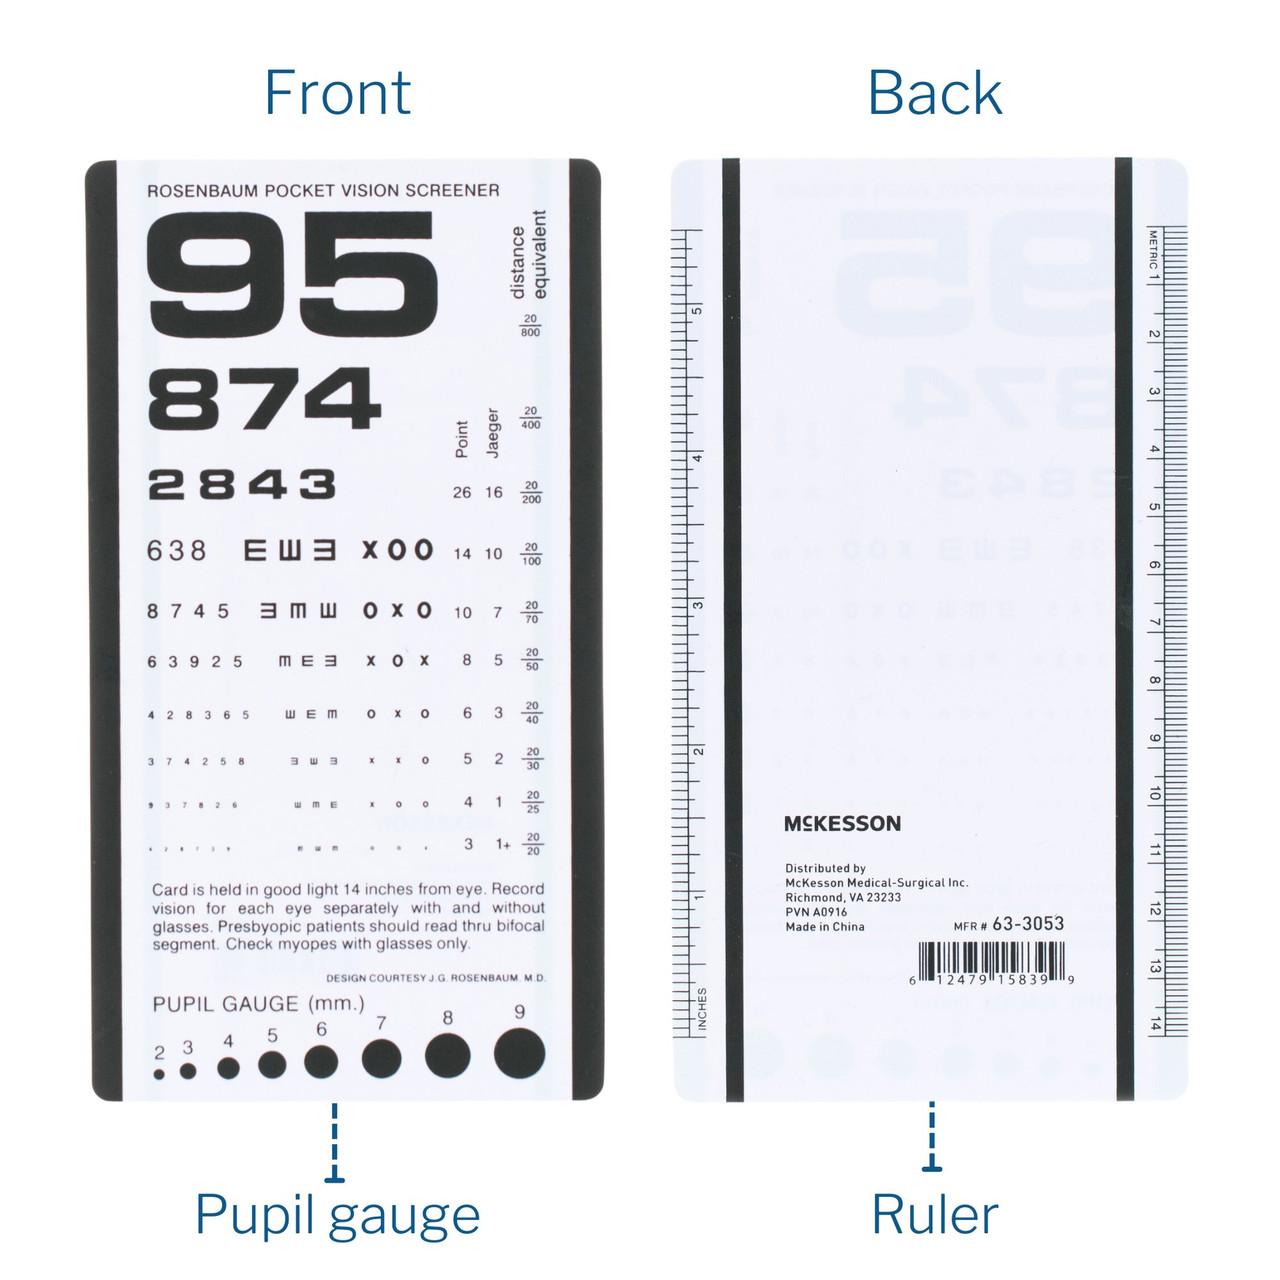 Snellen Visual Acuity Eye Chart for 10 Feet 14 x 9 Inches